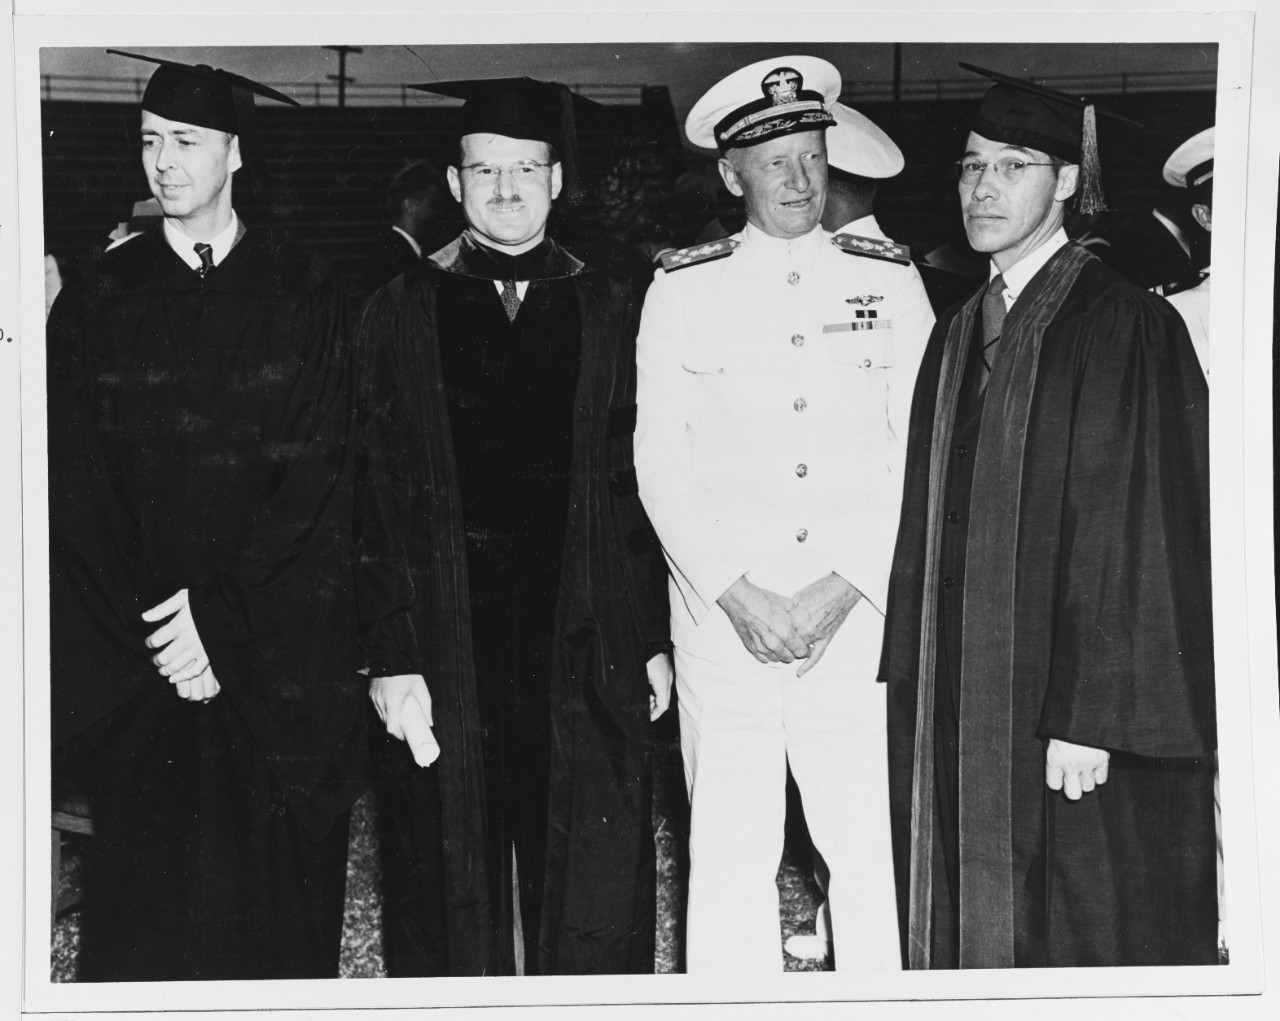 Admiral Chester W. Nimitz (CinCPac) attends the inauguration of a new president of the University of Hawaii.